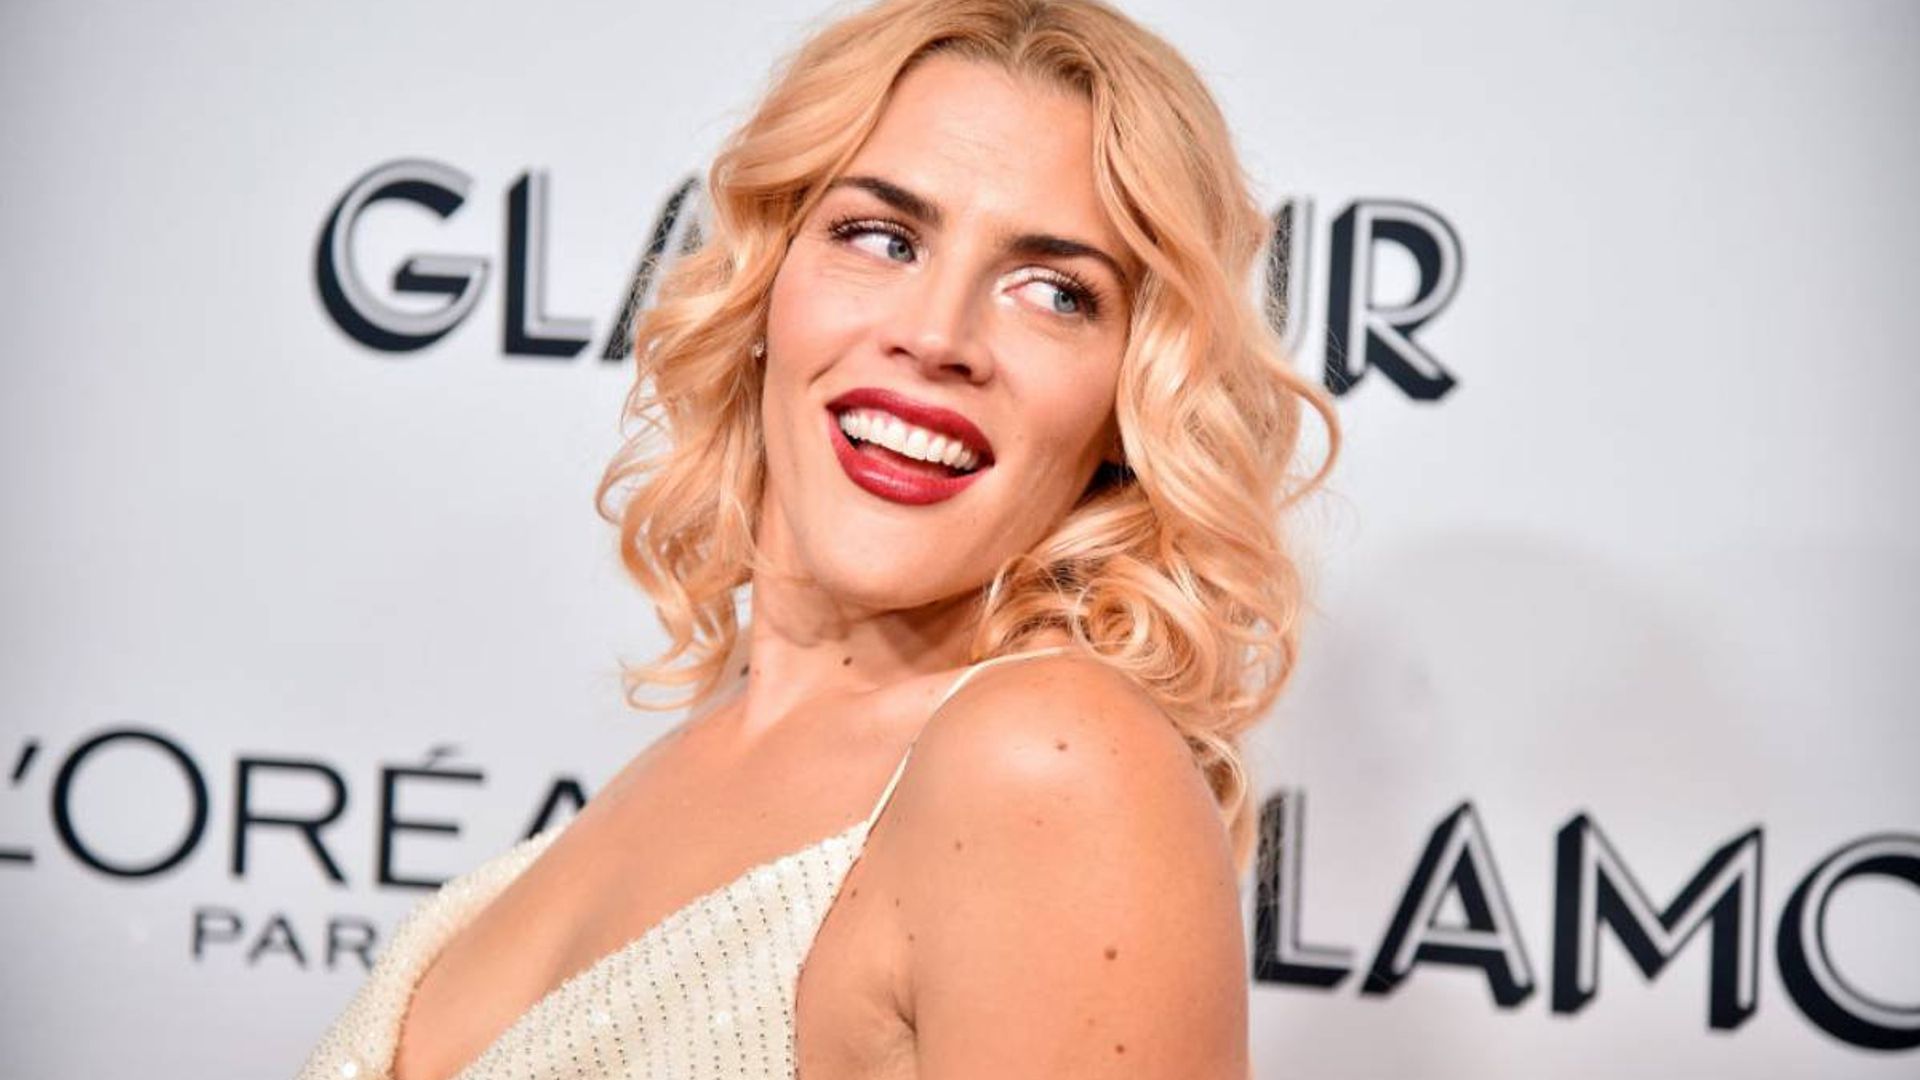 Busy Philipps is almost unrecongizable after bold makeover